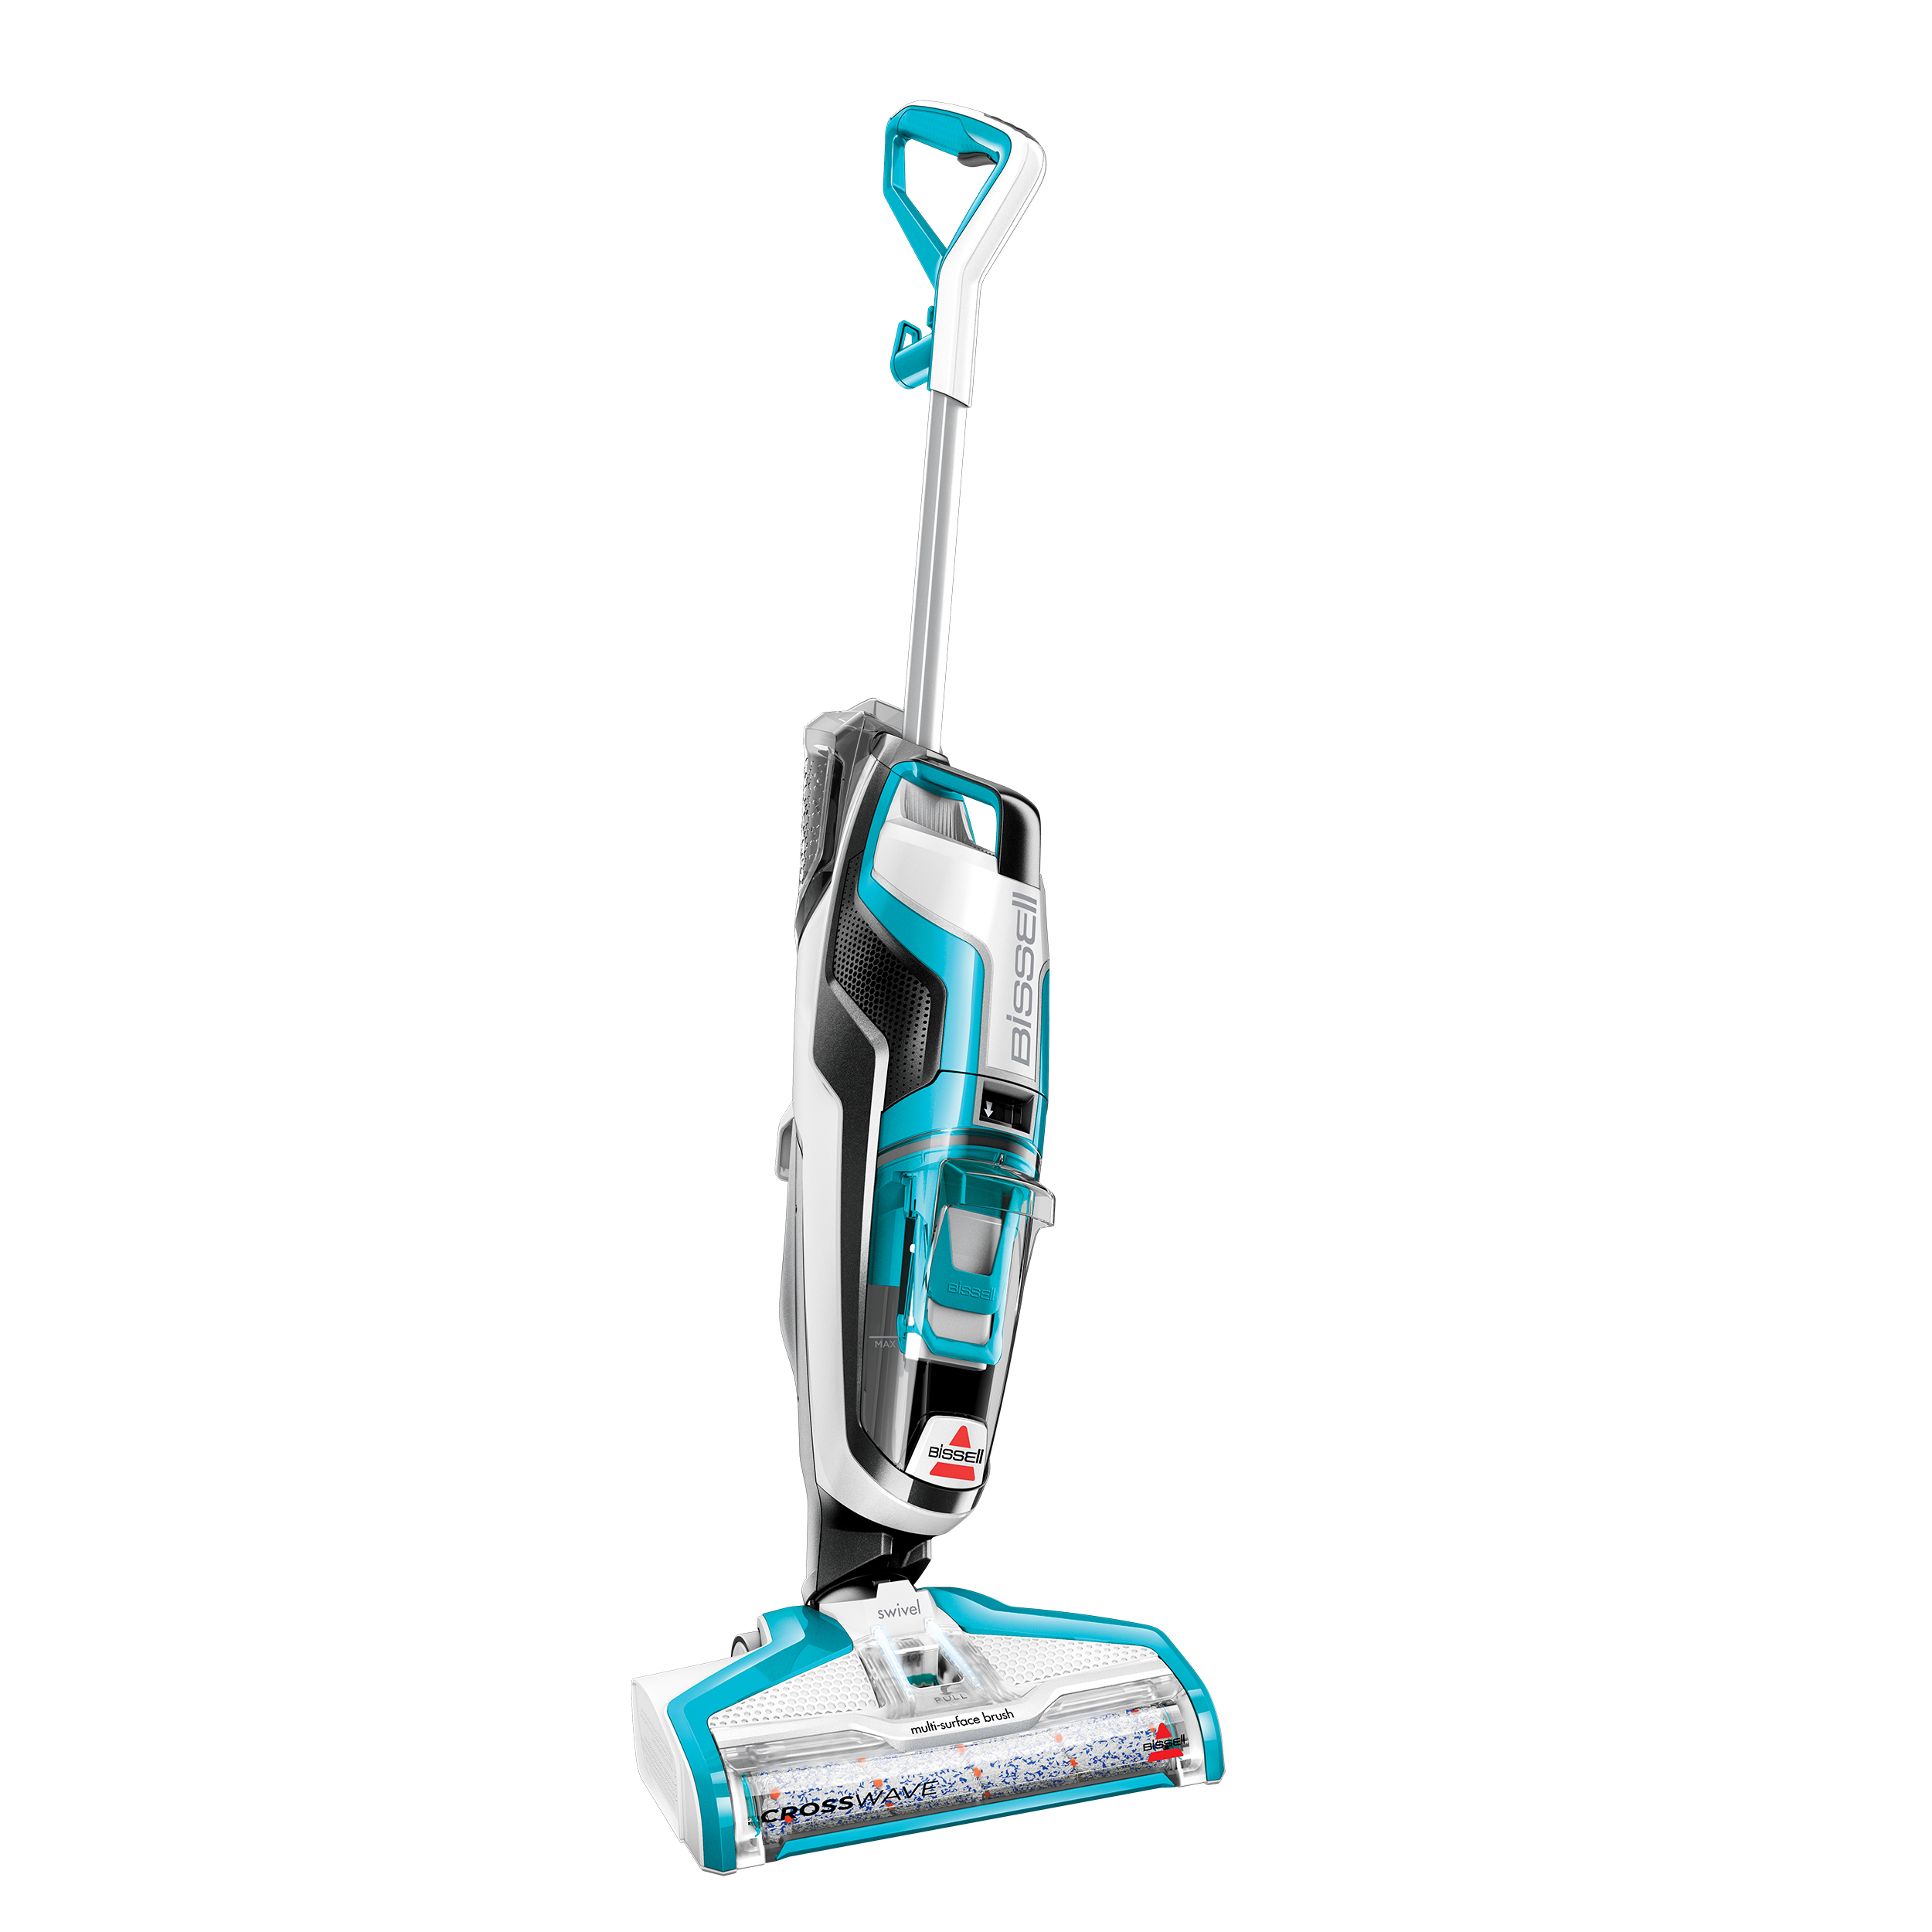 BISSELL Crosswave All-in-One Multi-Surface Wet Dry Vac, 1785W - image 1 of 11